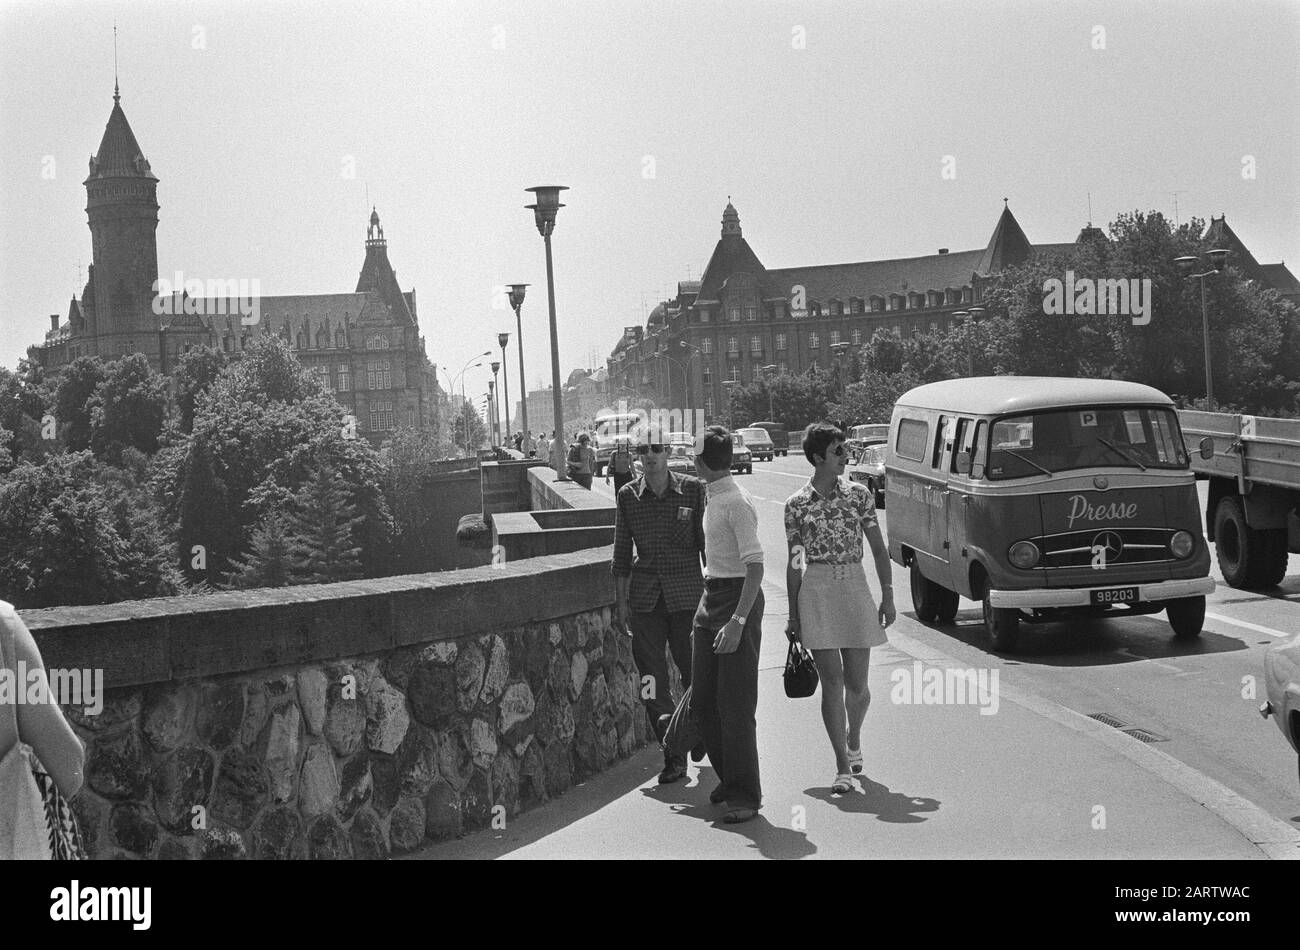 Townscapes Luxembourg, nr. 8, 10, 11 Vallee de la Petrusse, nr. 9 Pont Adolphe Date: 7 July 1971 Location: Luxembourg Keywords: Townscapes Stock Photo